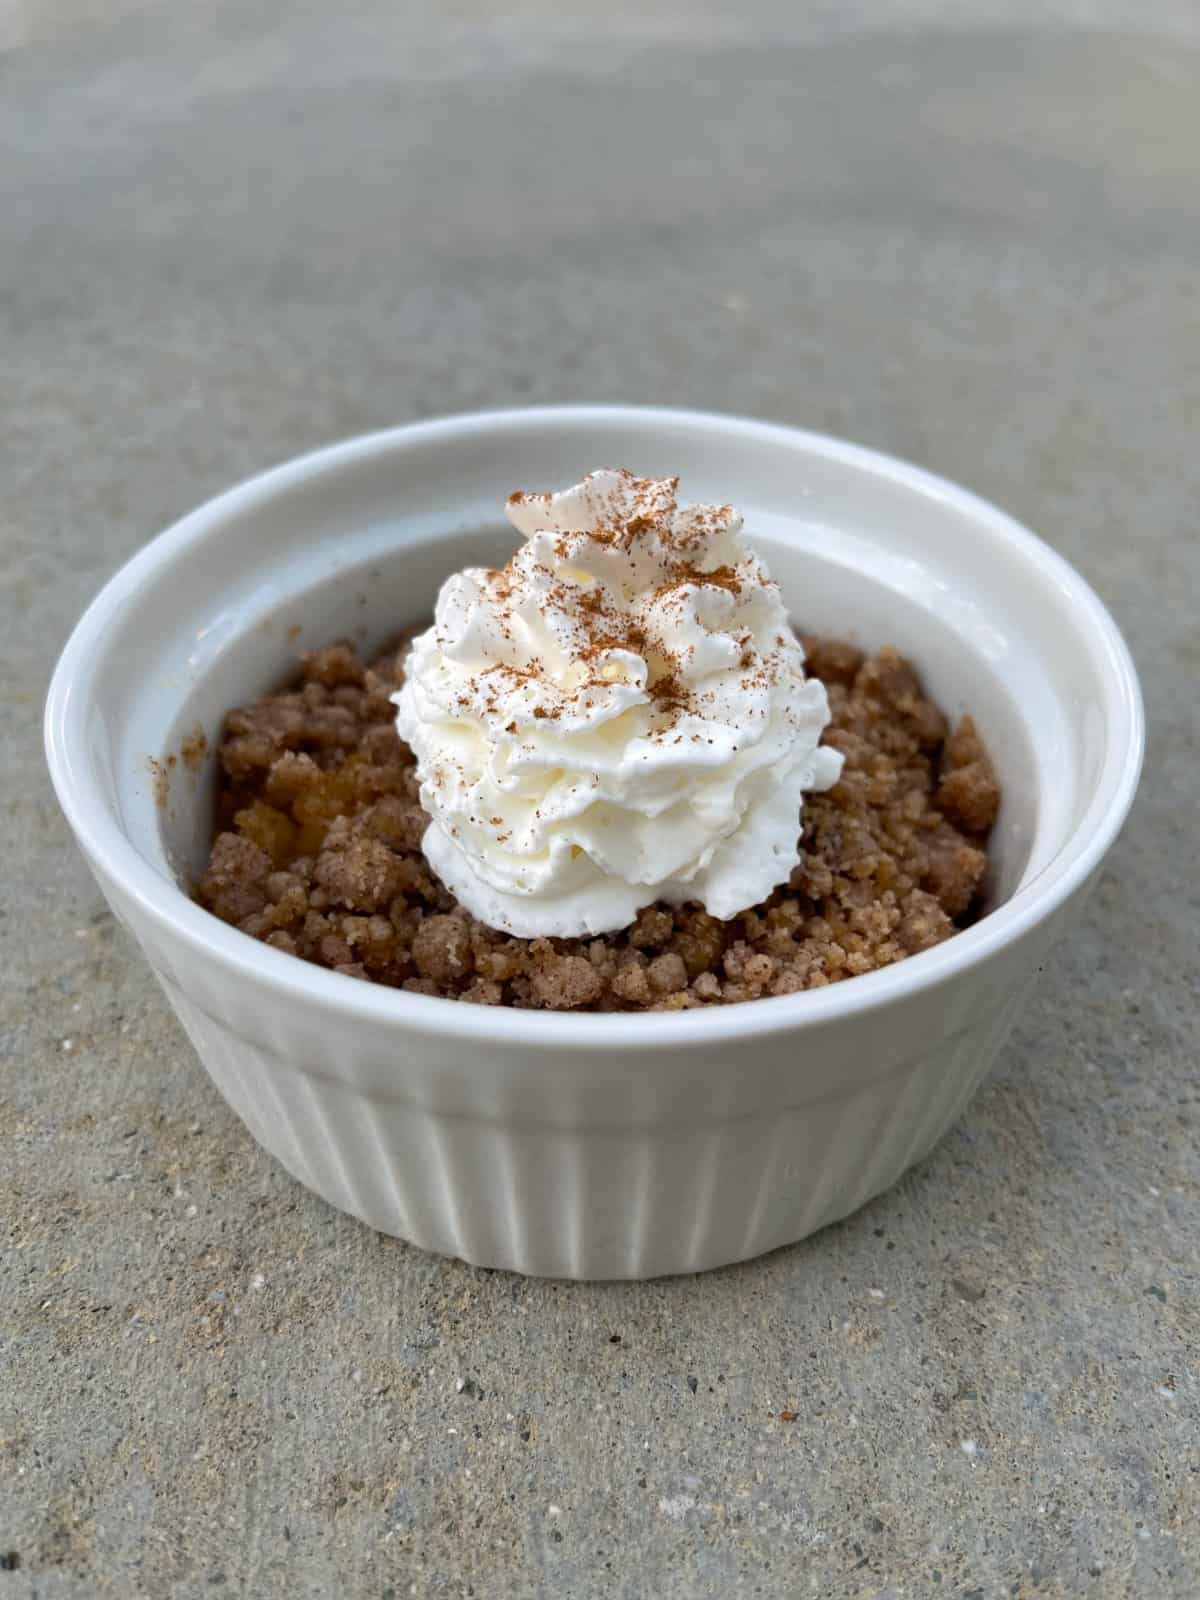 Microwave apple crisp in small white ramekin with whipped topping and cinnamon sprinkle.